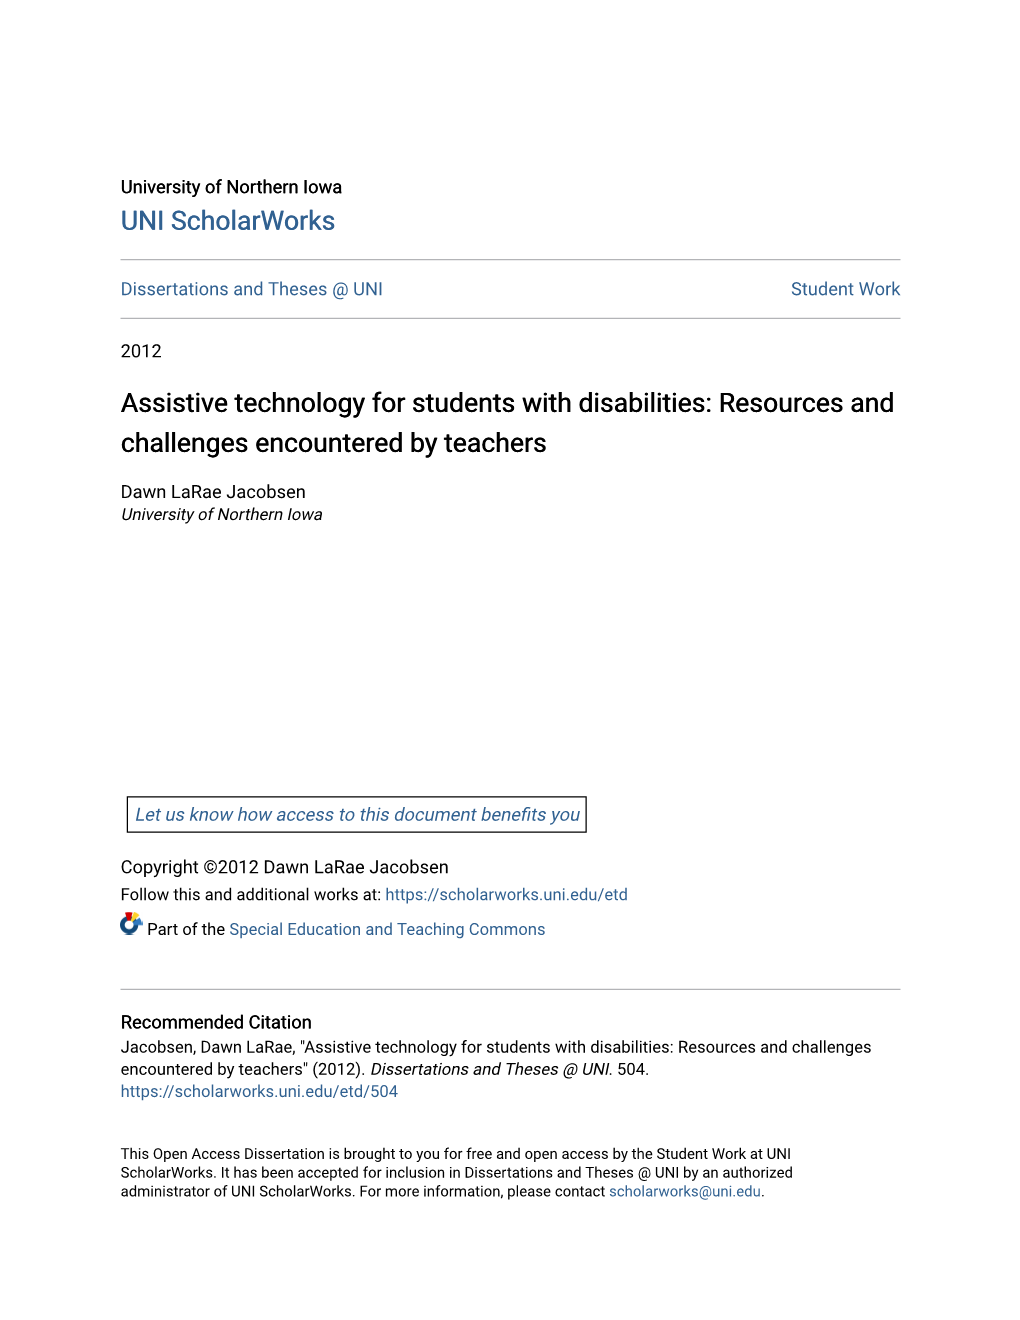 Assistive Technology for Students with Disabilities: Resources and Challenges Encountered by Teachers